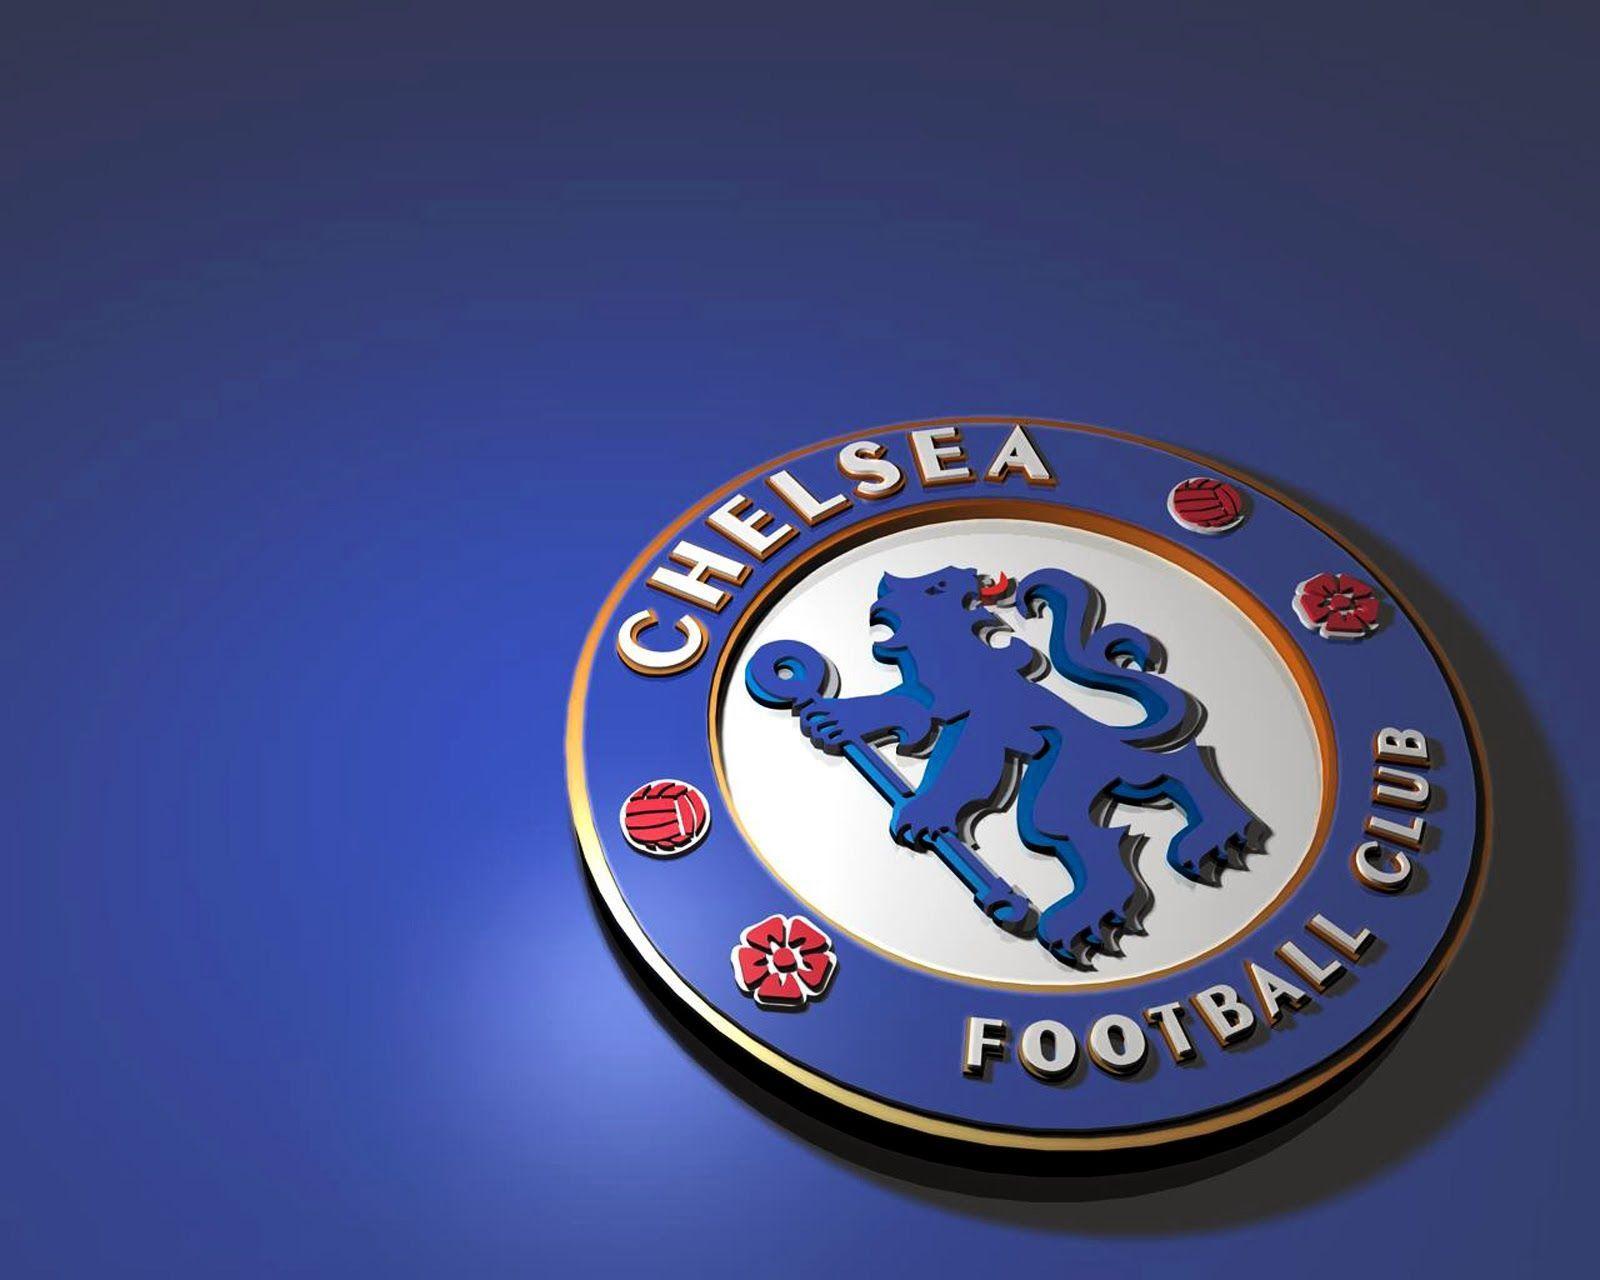 Collection of Chelsea Fc iPhone Wallpaper on Spyder Wallpaper 576